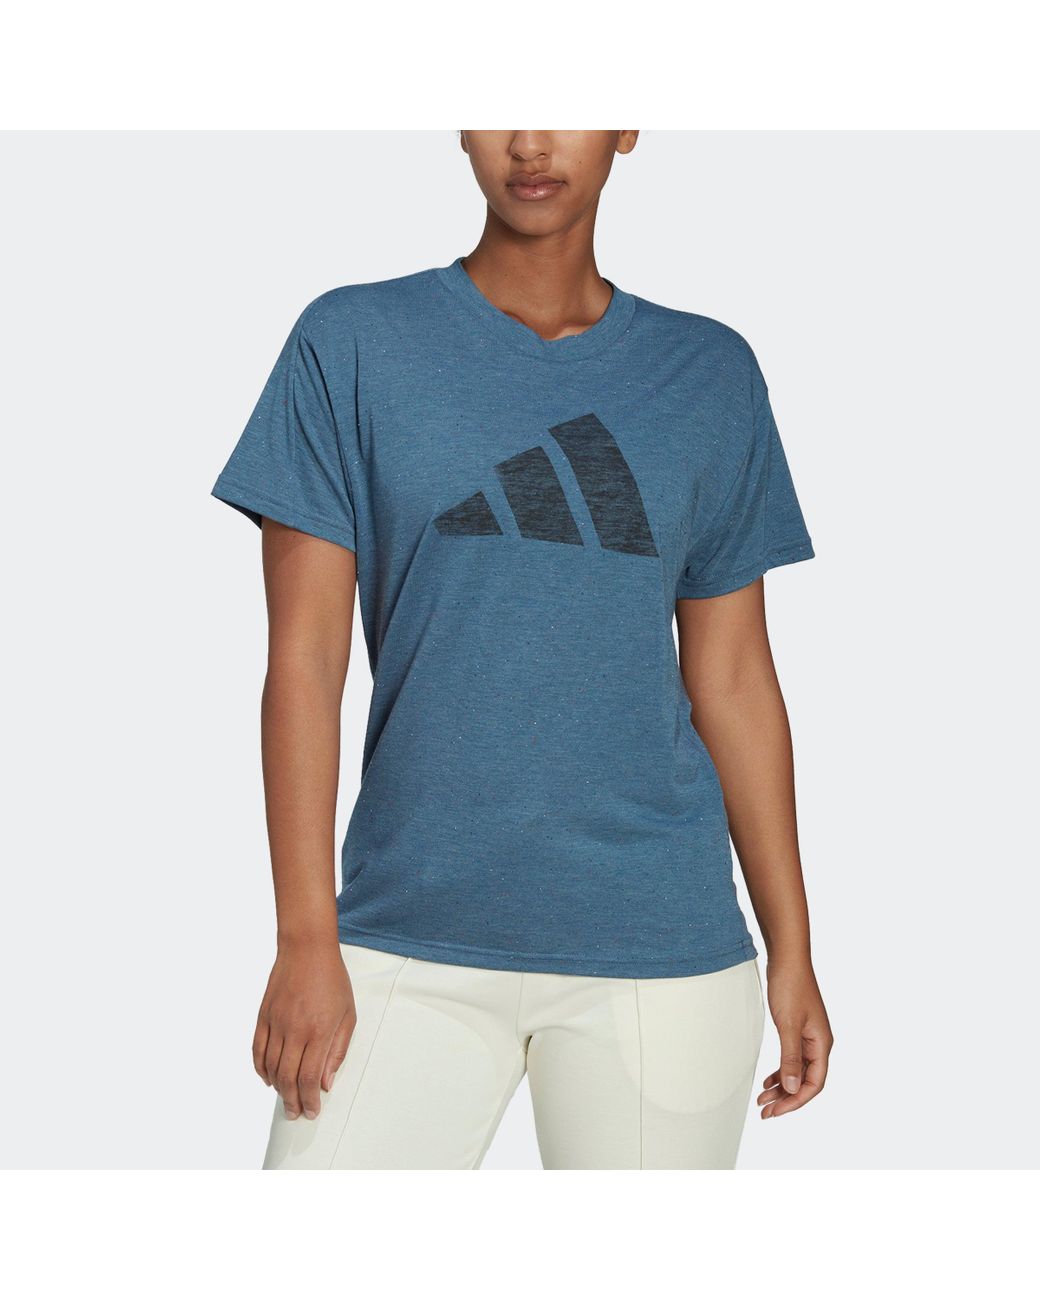 adidas Future Icons Winners 3.0 Tee in Blue | Lyst